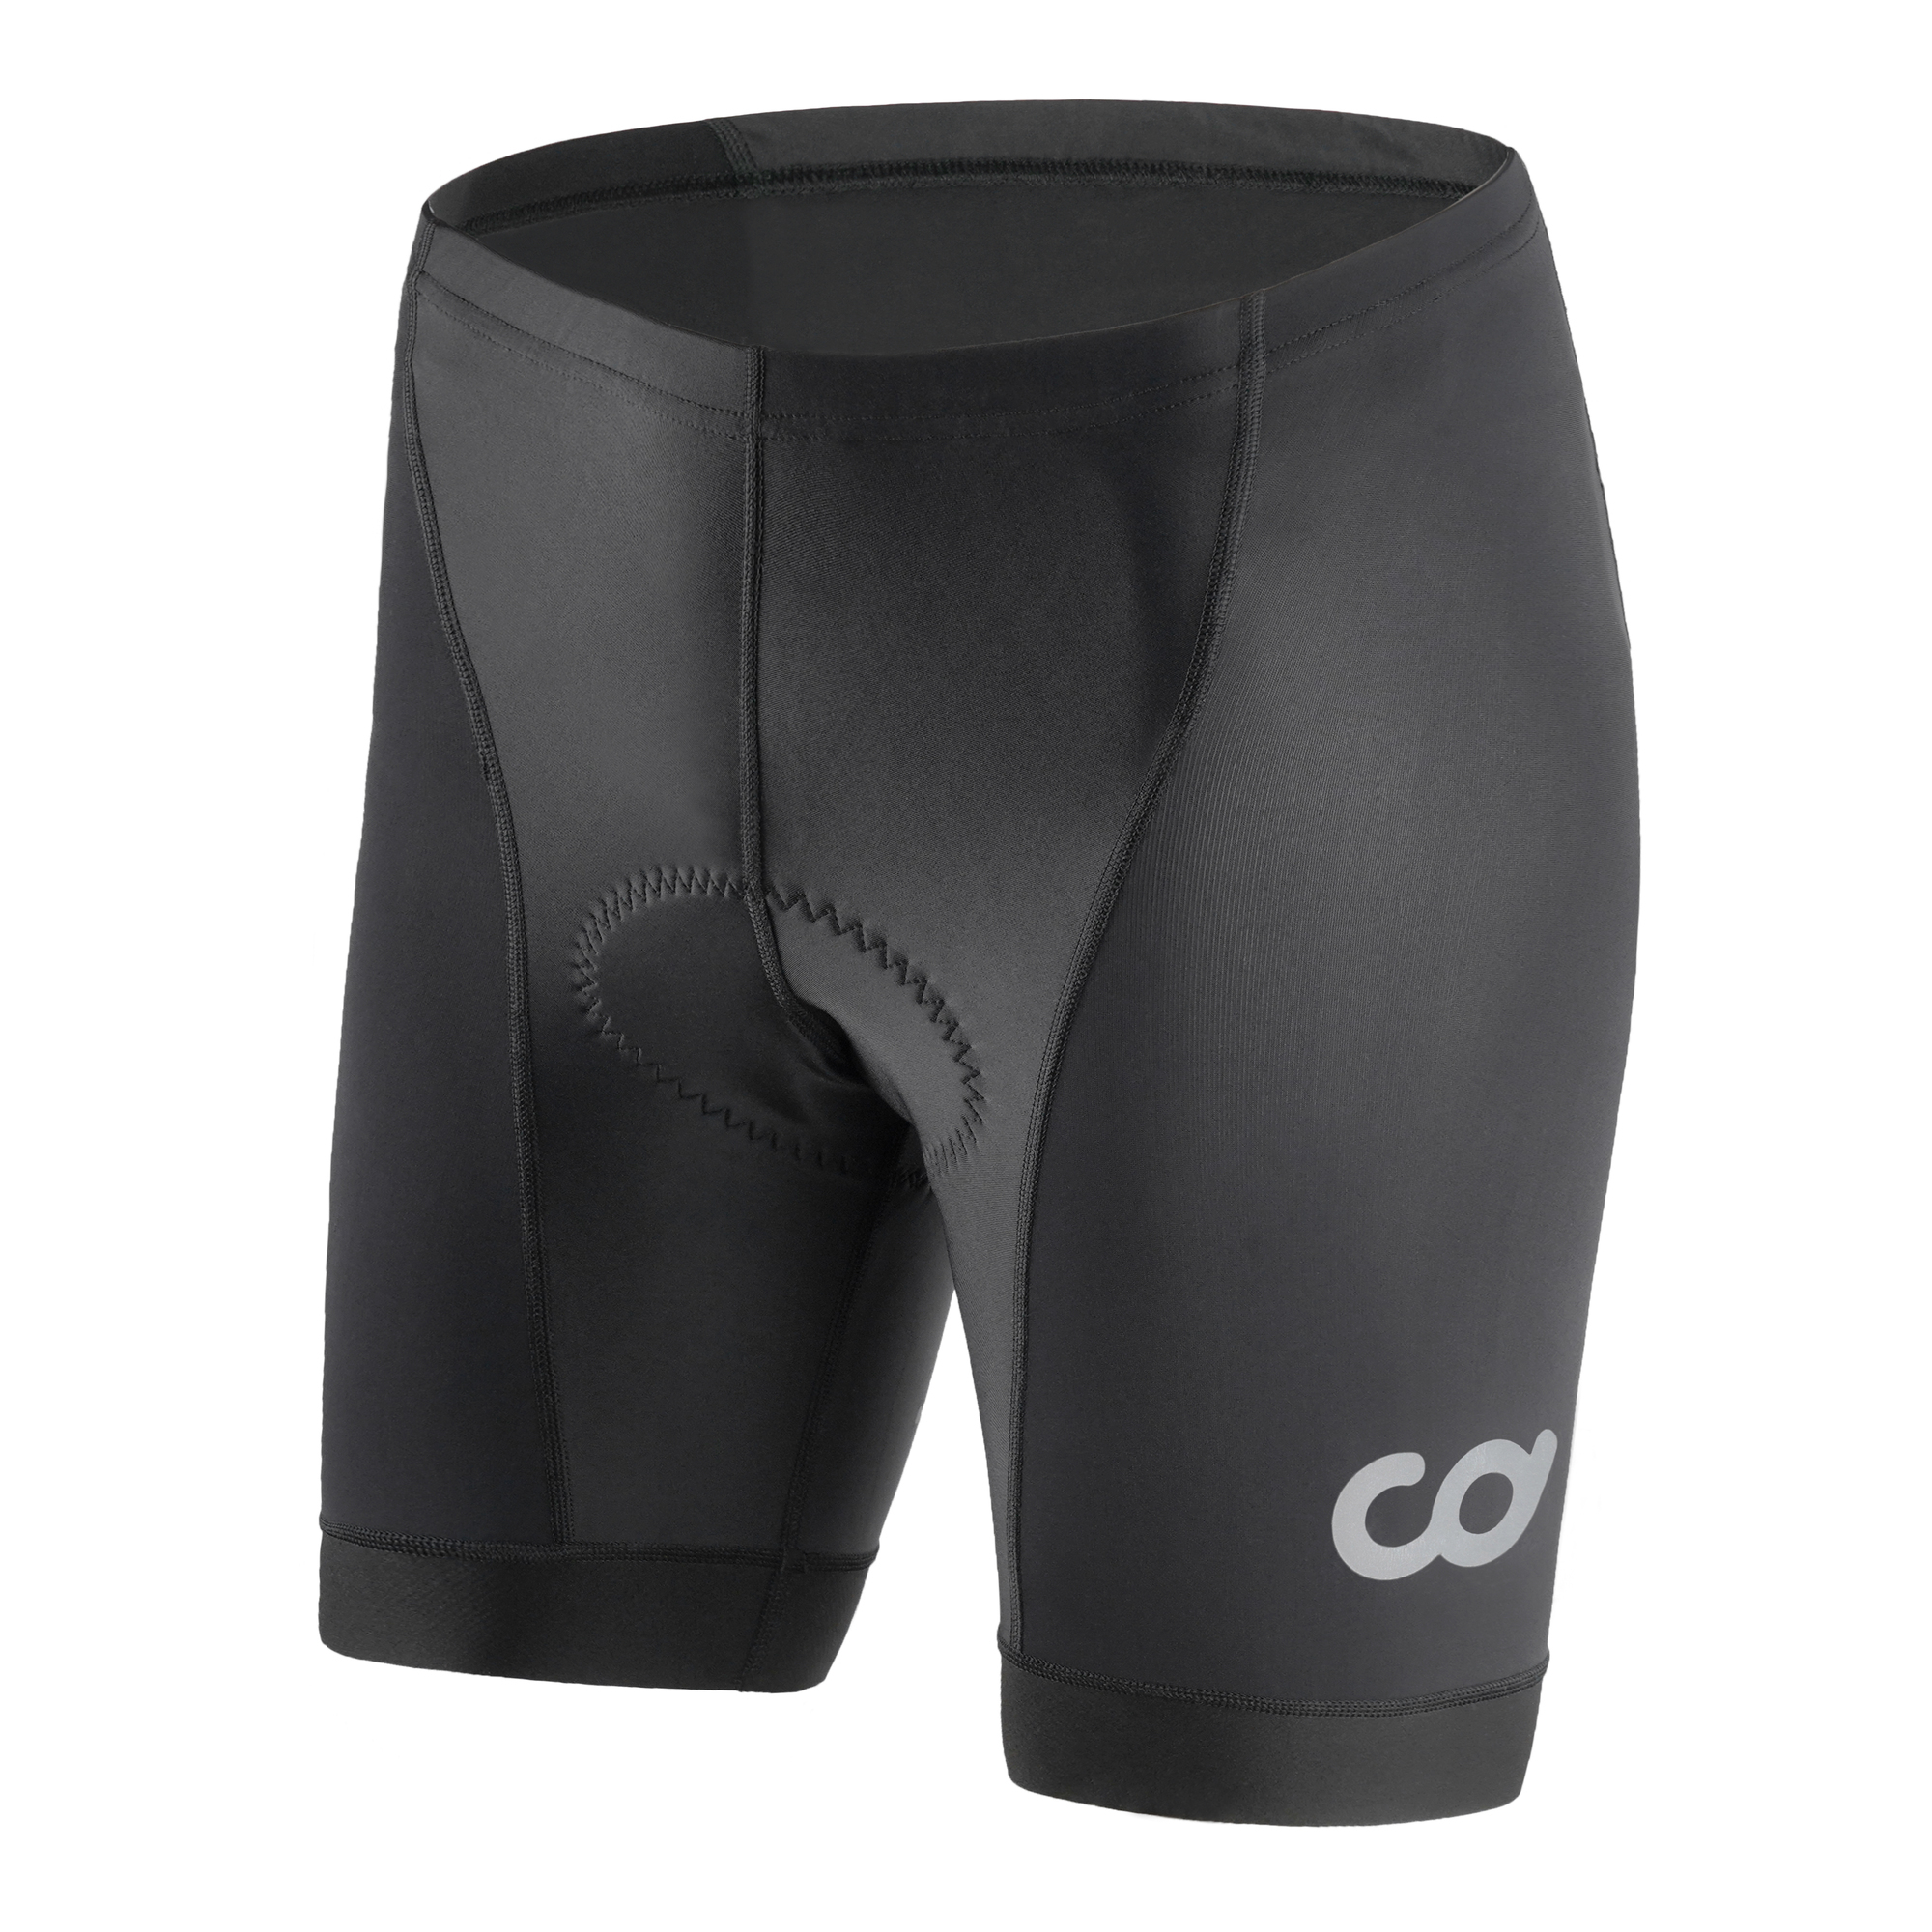 CDEAL Bike Bicycle Cycling Padded Shorts L